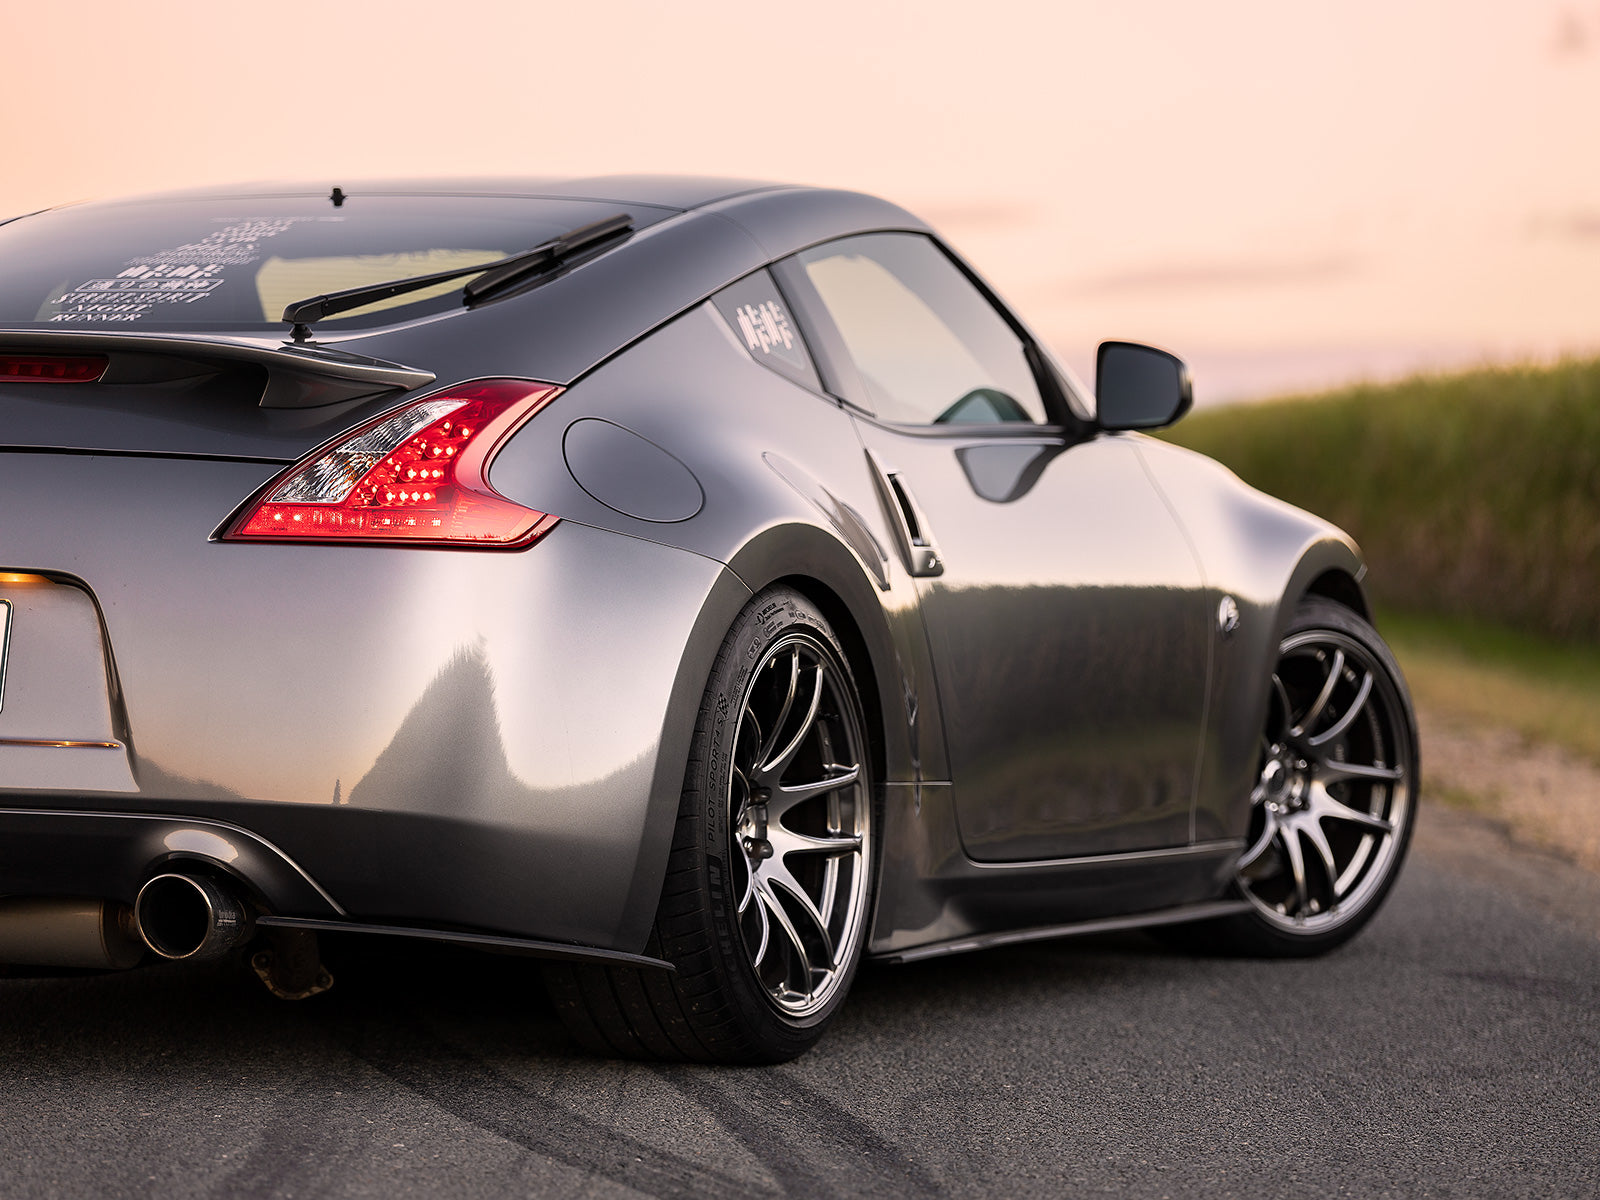 370z Project Aero rear spats/pods compliment the OEM factory rear bumper for a more subtle yet aggressive look